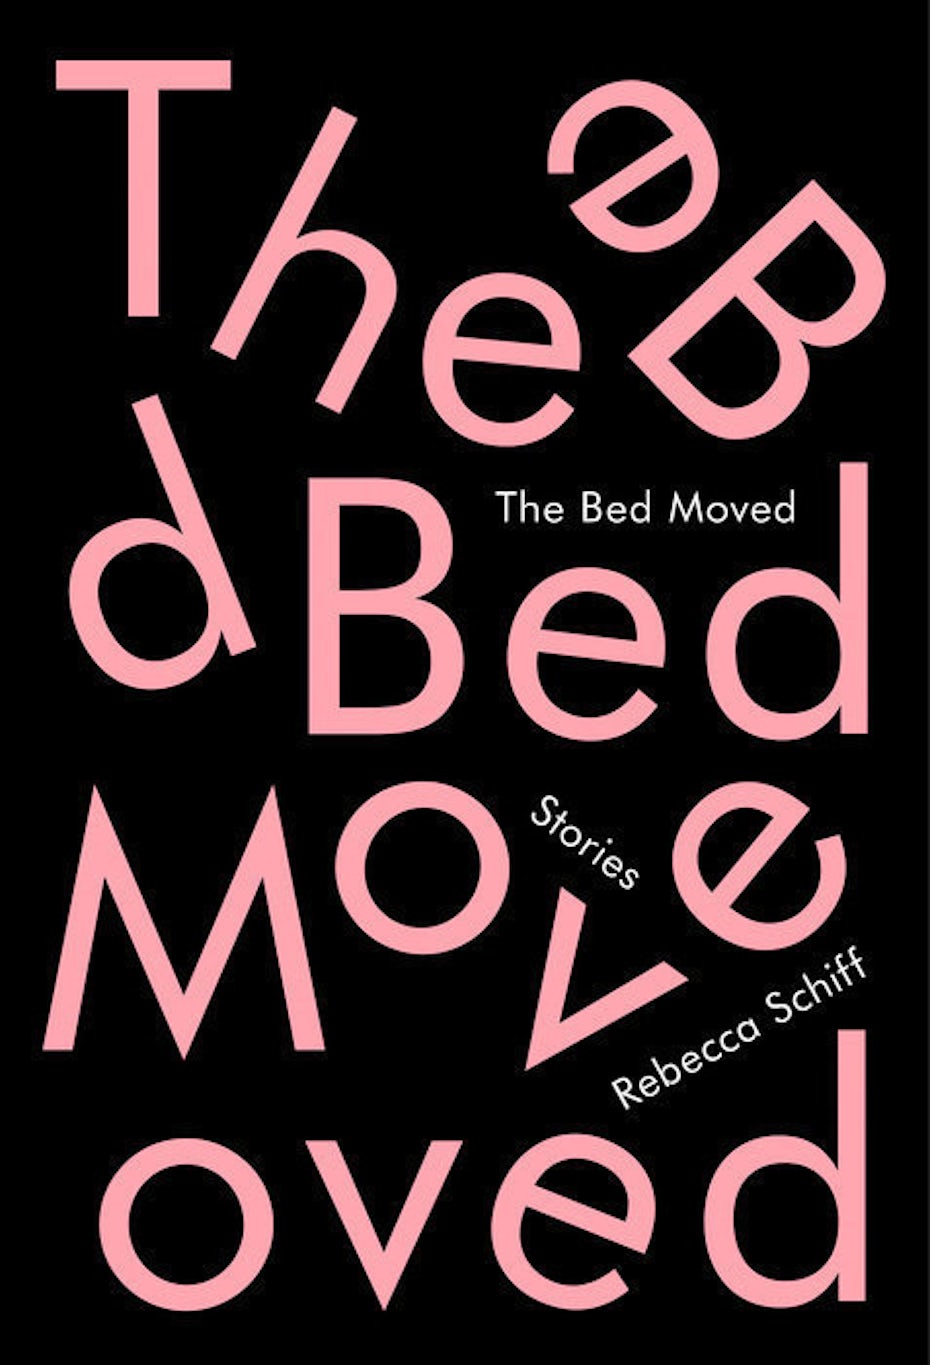 principles of design - The Bed Moved by Rebecca Schiff, Designed by Janet Hansen